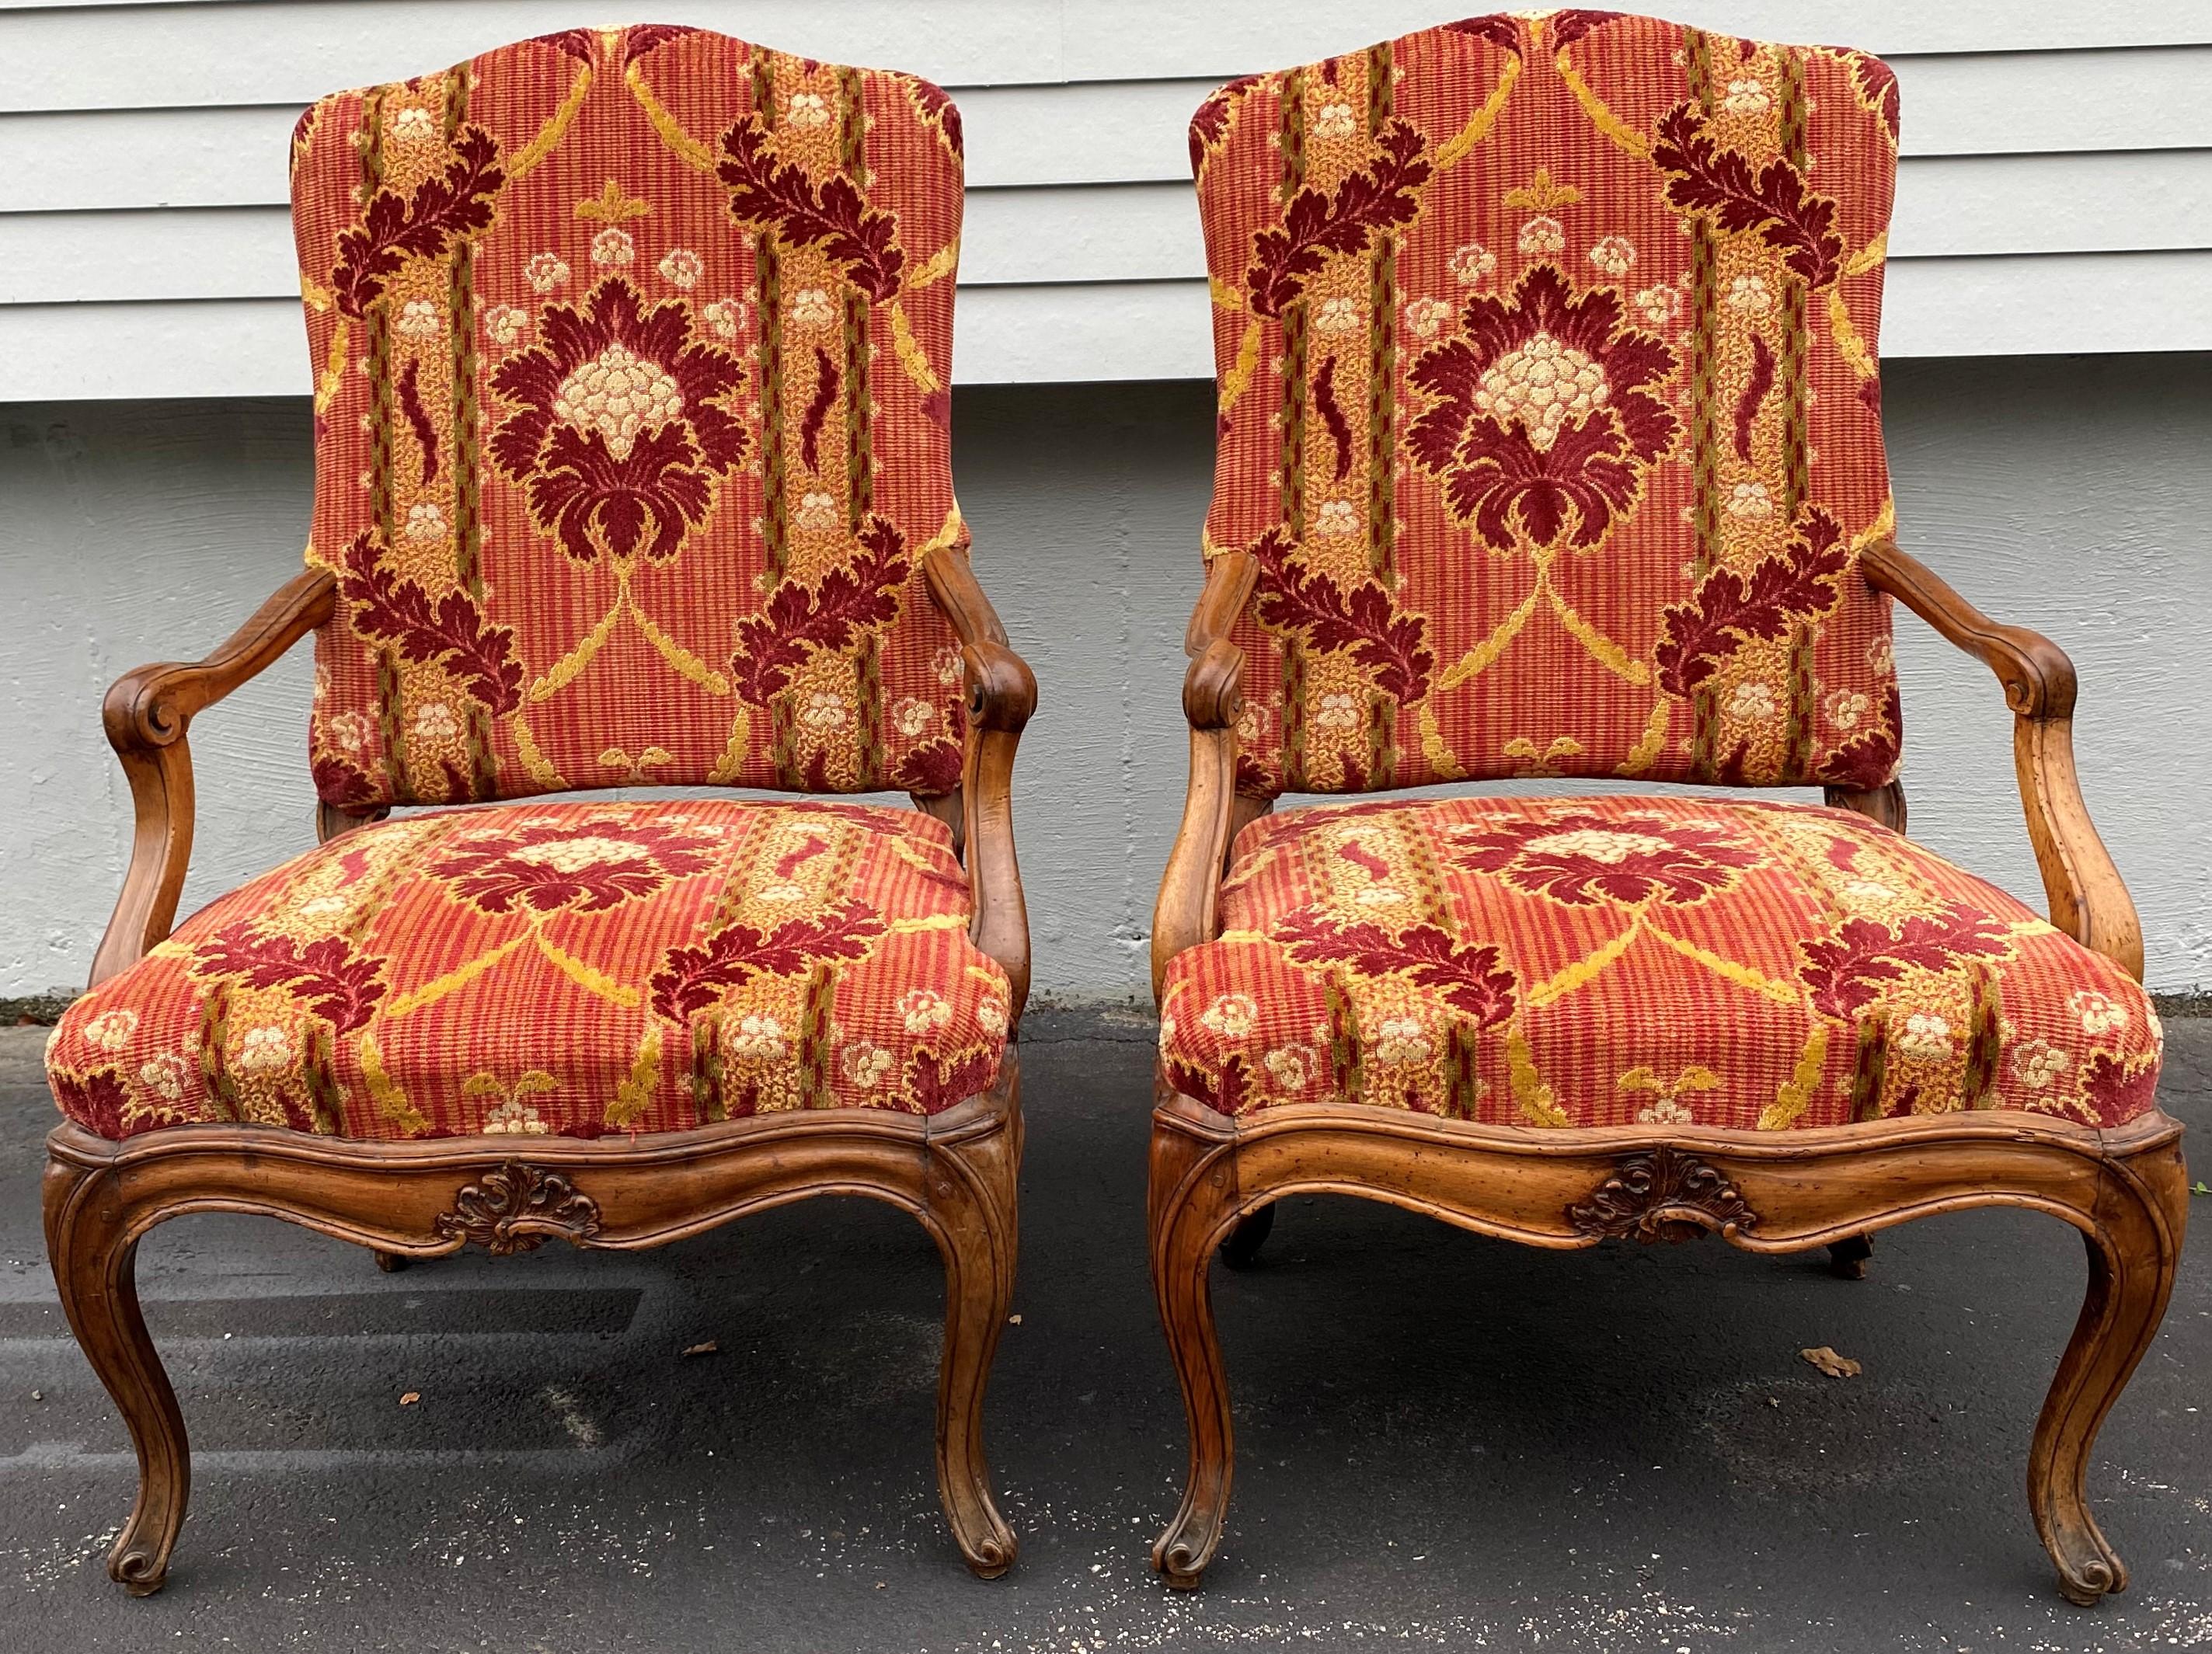 A fine pair of Louis XV style upholstered carved fruitwood armchairs with arched crests, scroll carved arms, a leaf carved center decoration along the front skirt, all supported by four French legs with scroll feet. The backs are finished with a